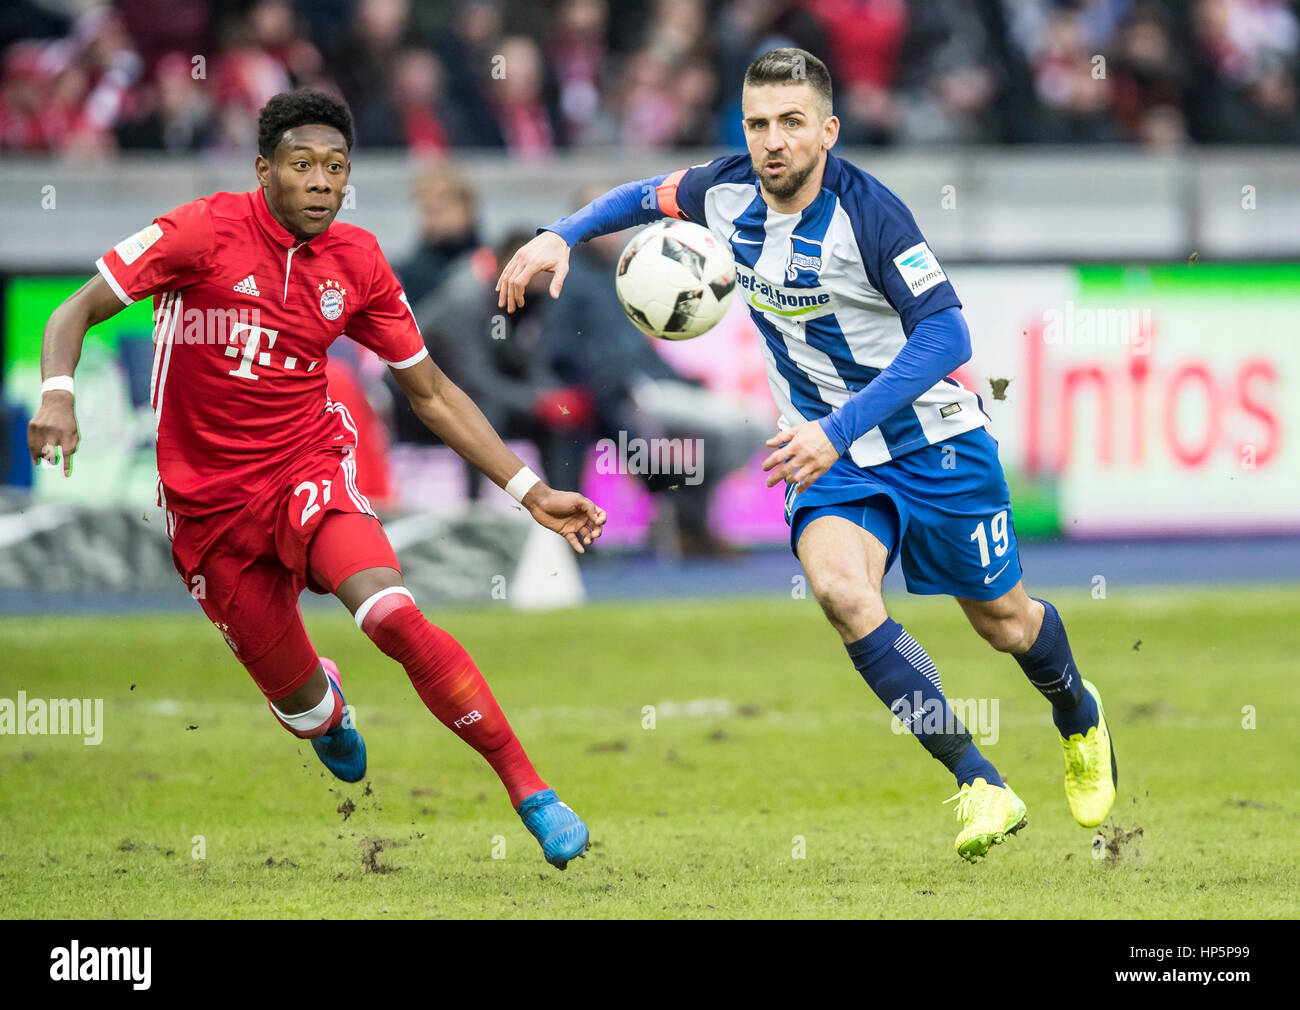 Berlin, Germany. 18 th February, 2017.  Vedad IBISEVIC, Hertha 19  compete for the ball against  David ALABA, FCB 27  in the 1. German Soccer League match HERTHA BSC BERLIN - FC BAYERN MUNICH  in Berlin,, February 18, 2017   © Peter Schatz / Alamy Live News Stock Photo